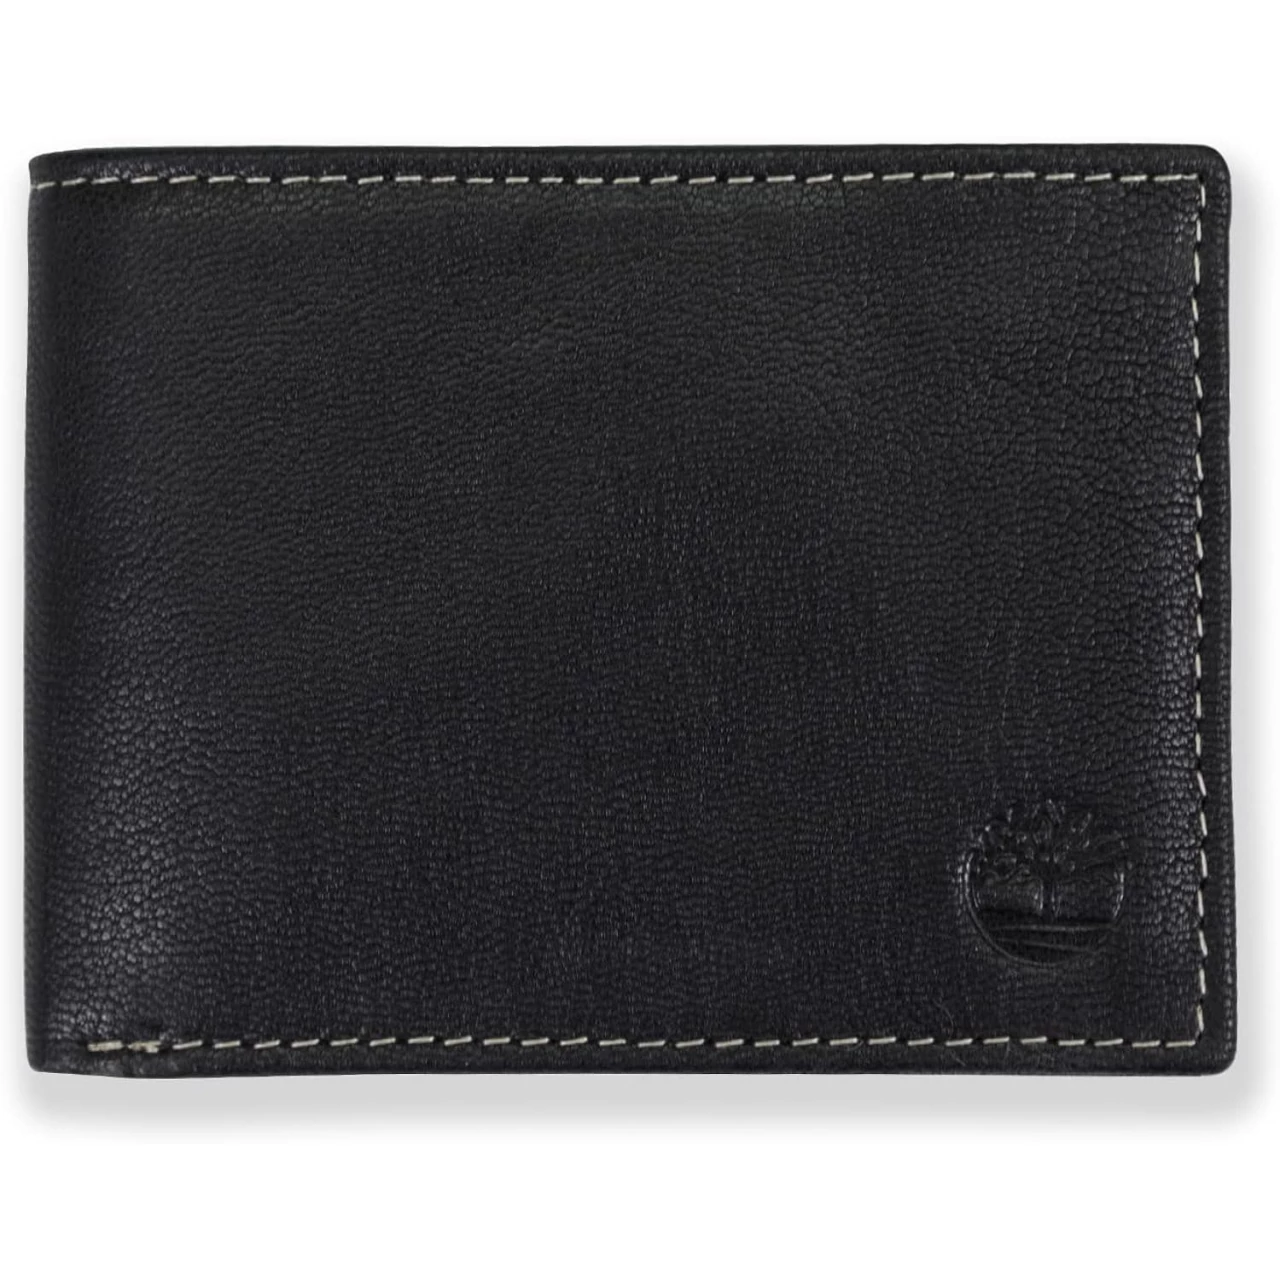 Timberland Men&rsquo;s Leather RFID Blocking Passcase Security Wallet